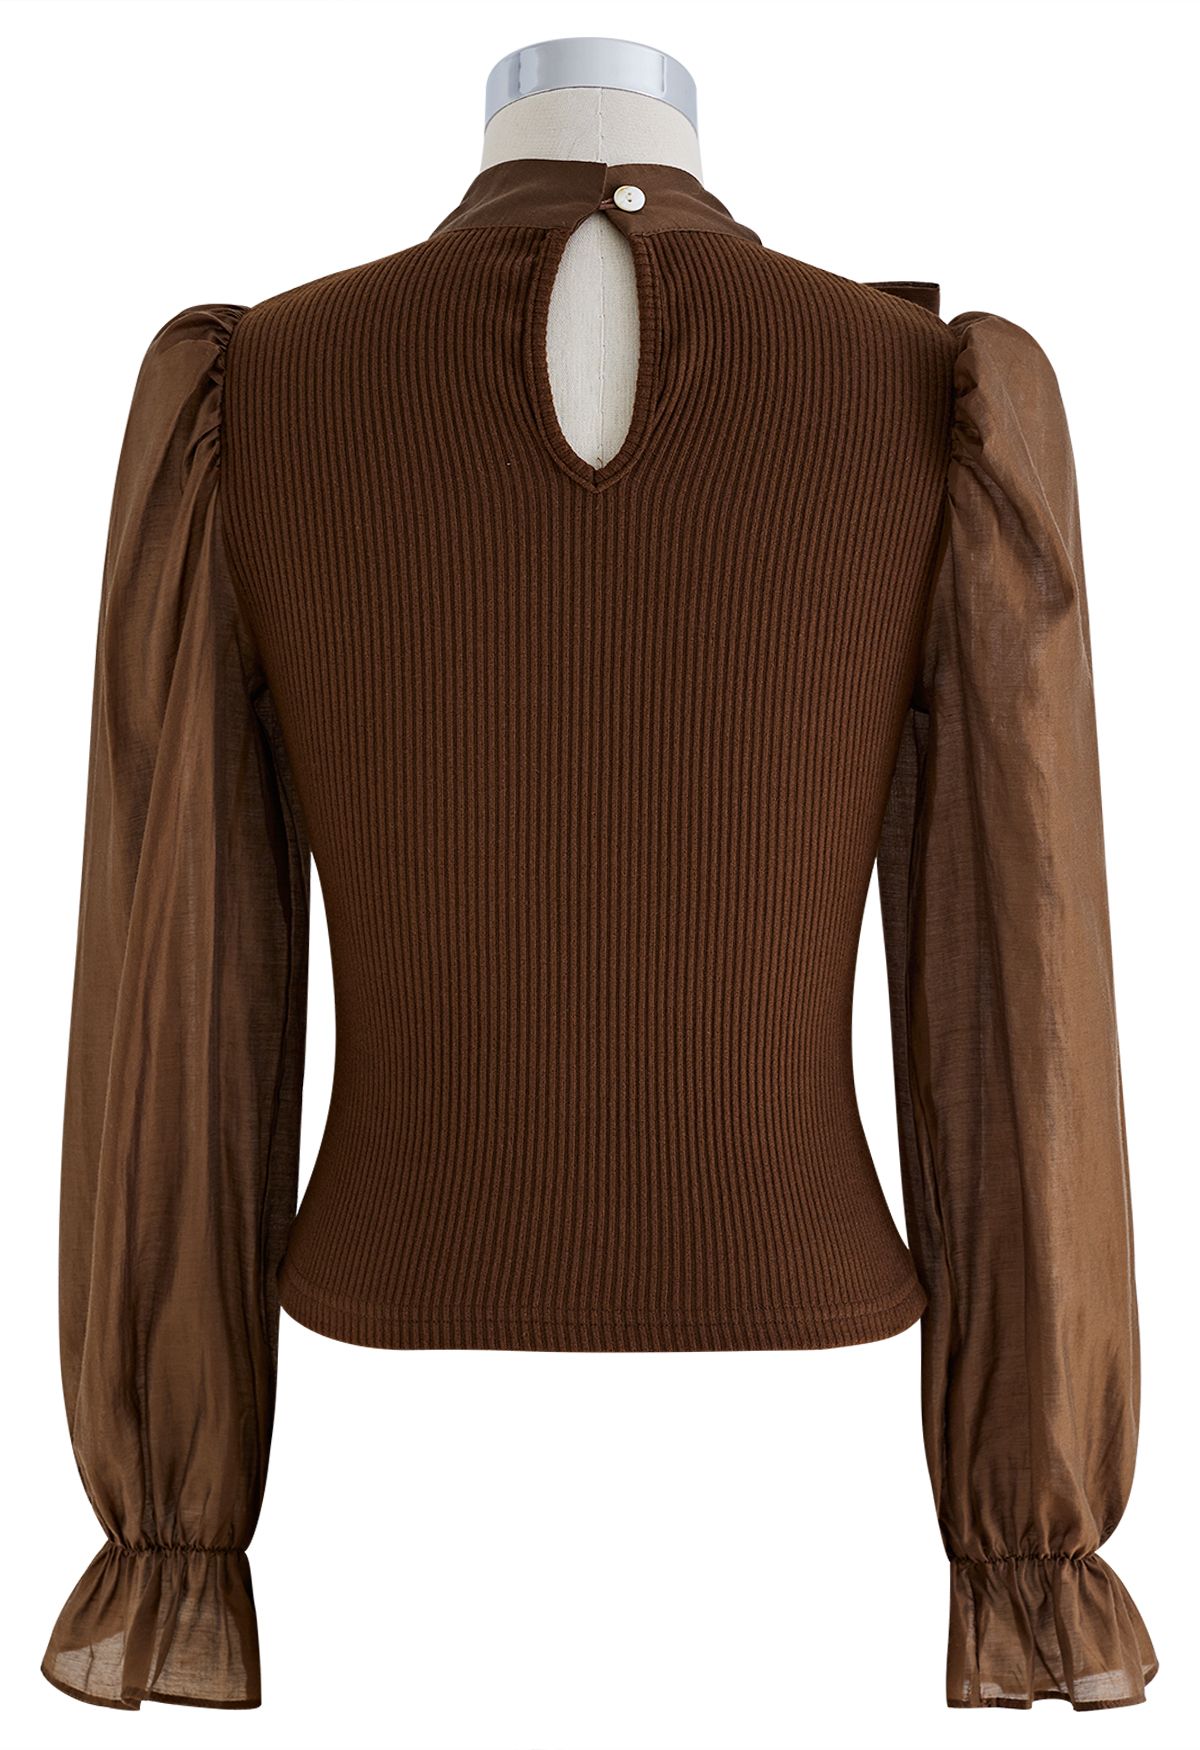 Detachable Bowknot Spliced Knit Top in Brown